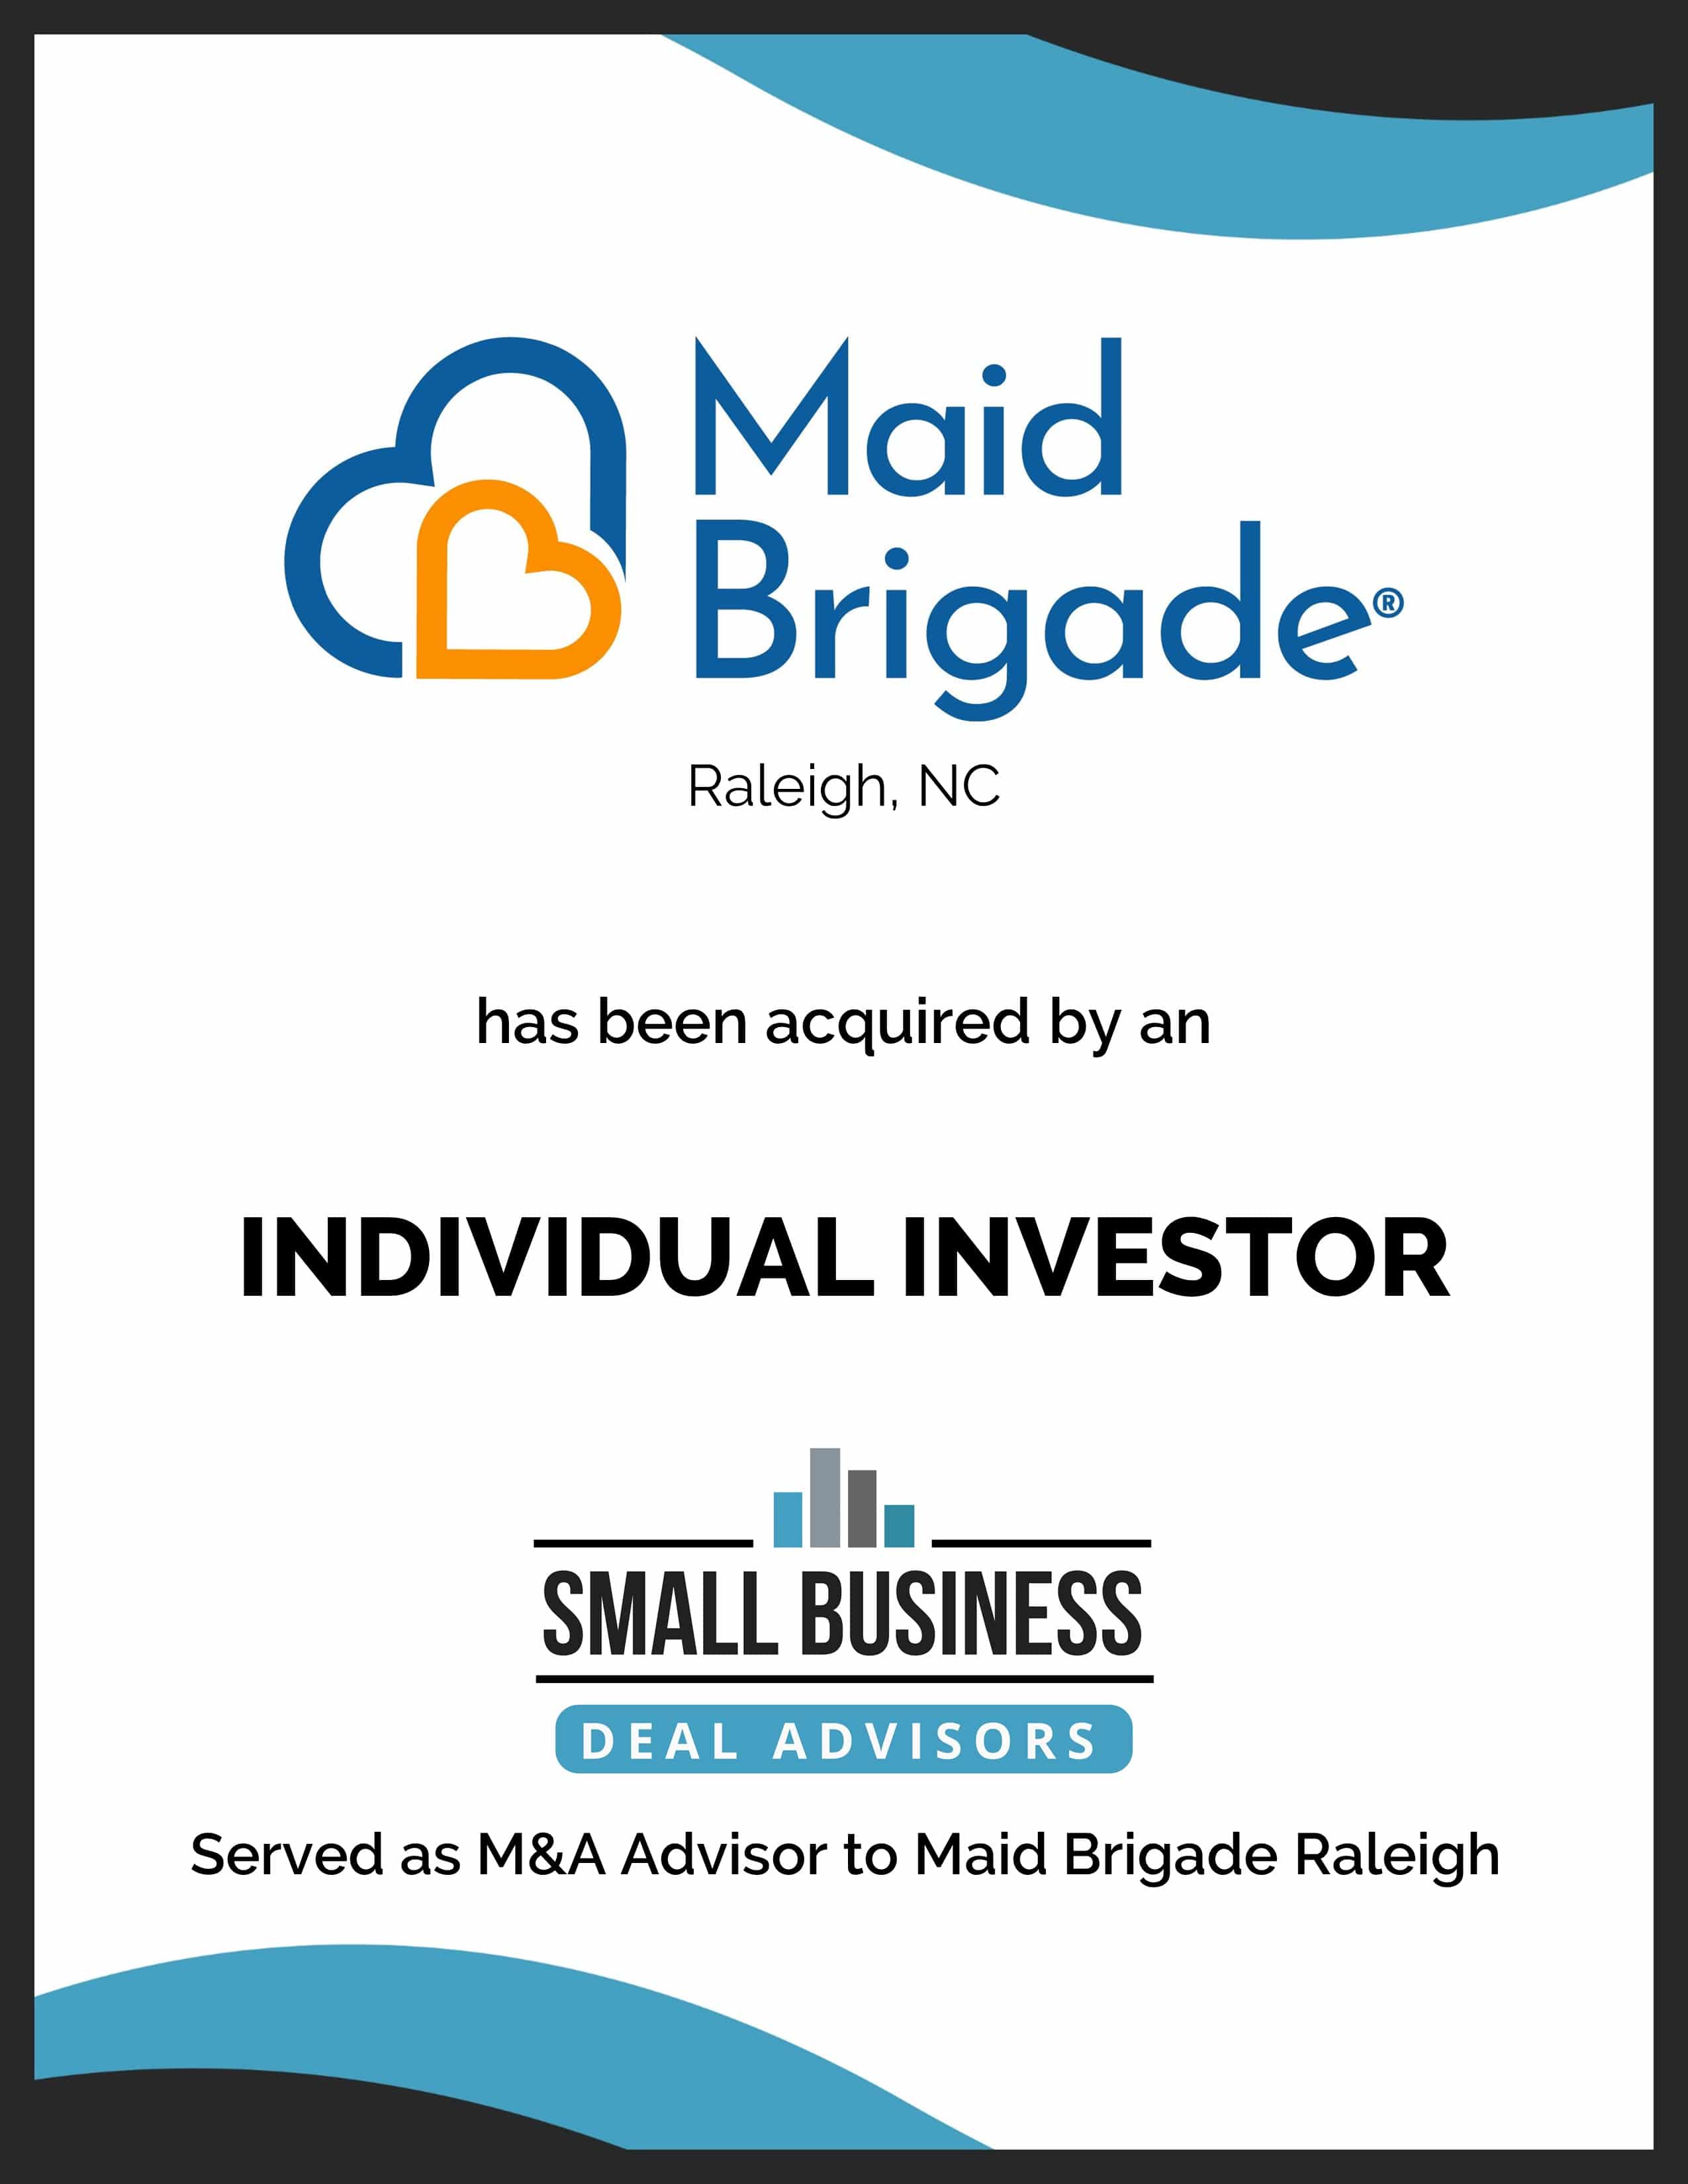 Maid Brigade Raleigh Sold to an individual investor